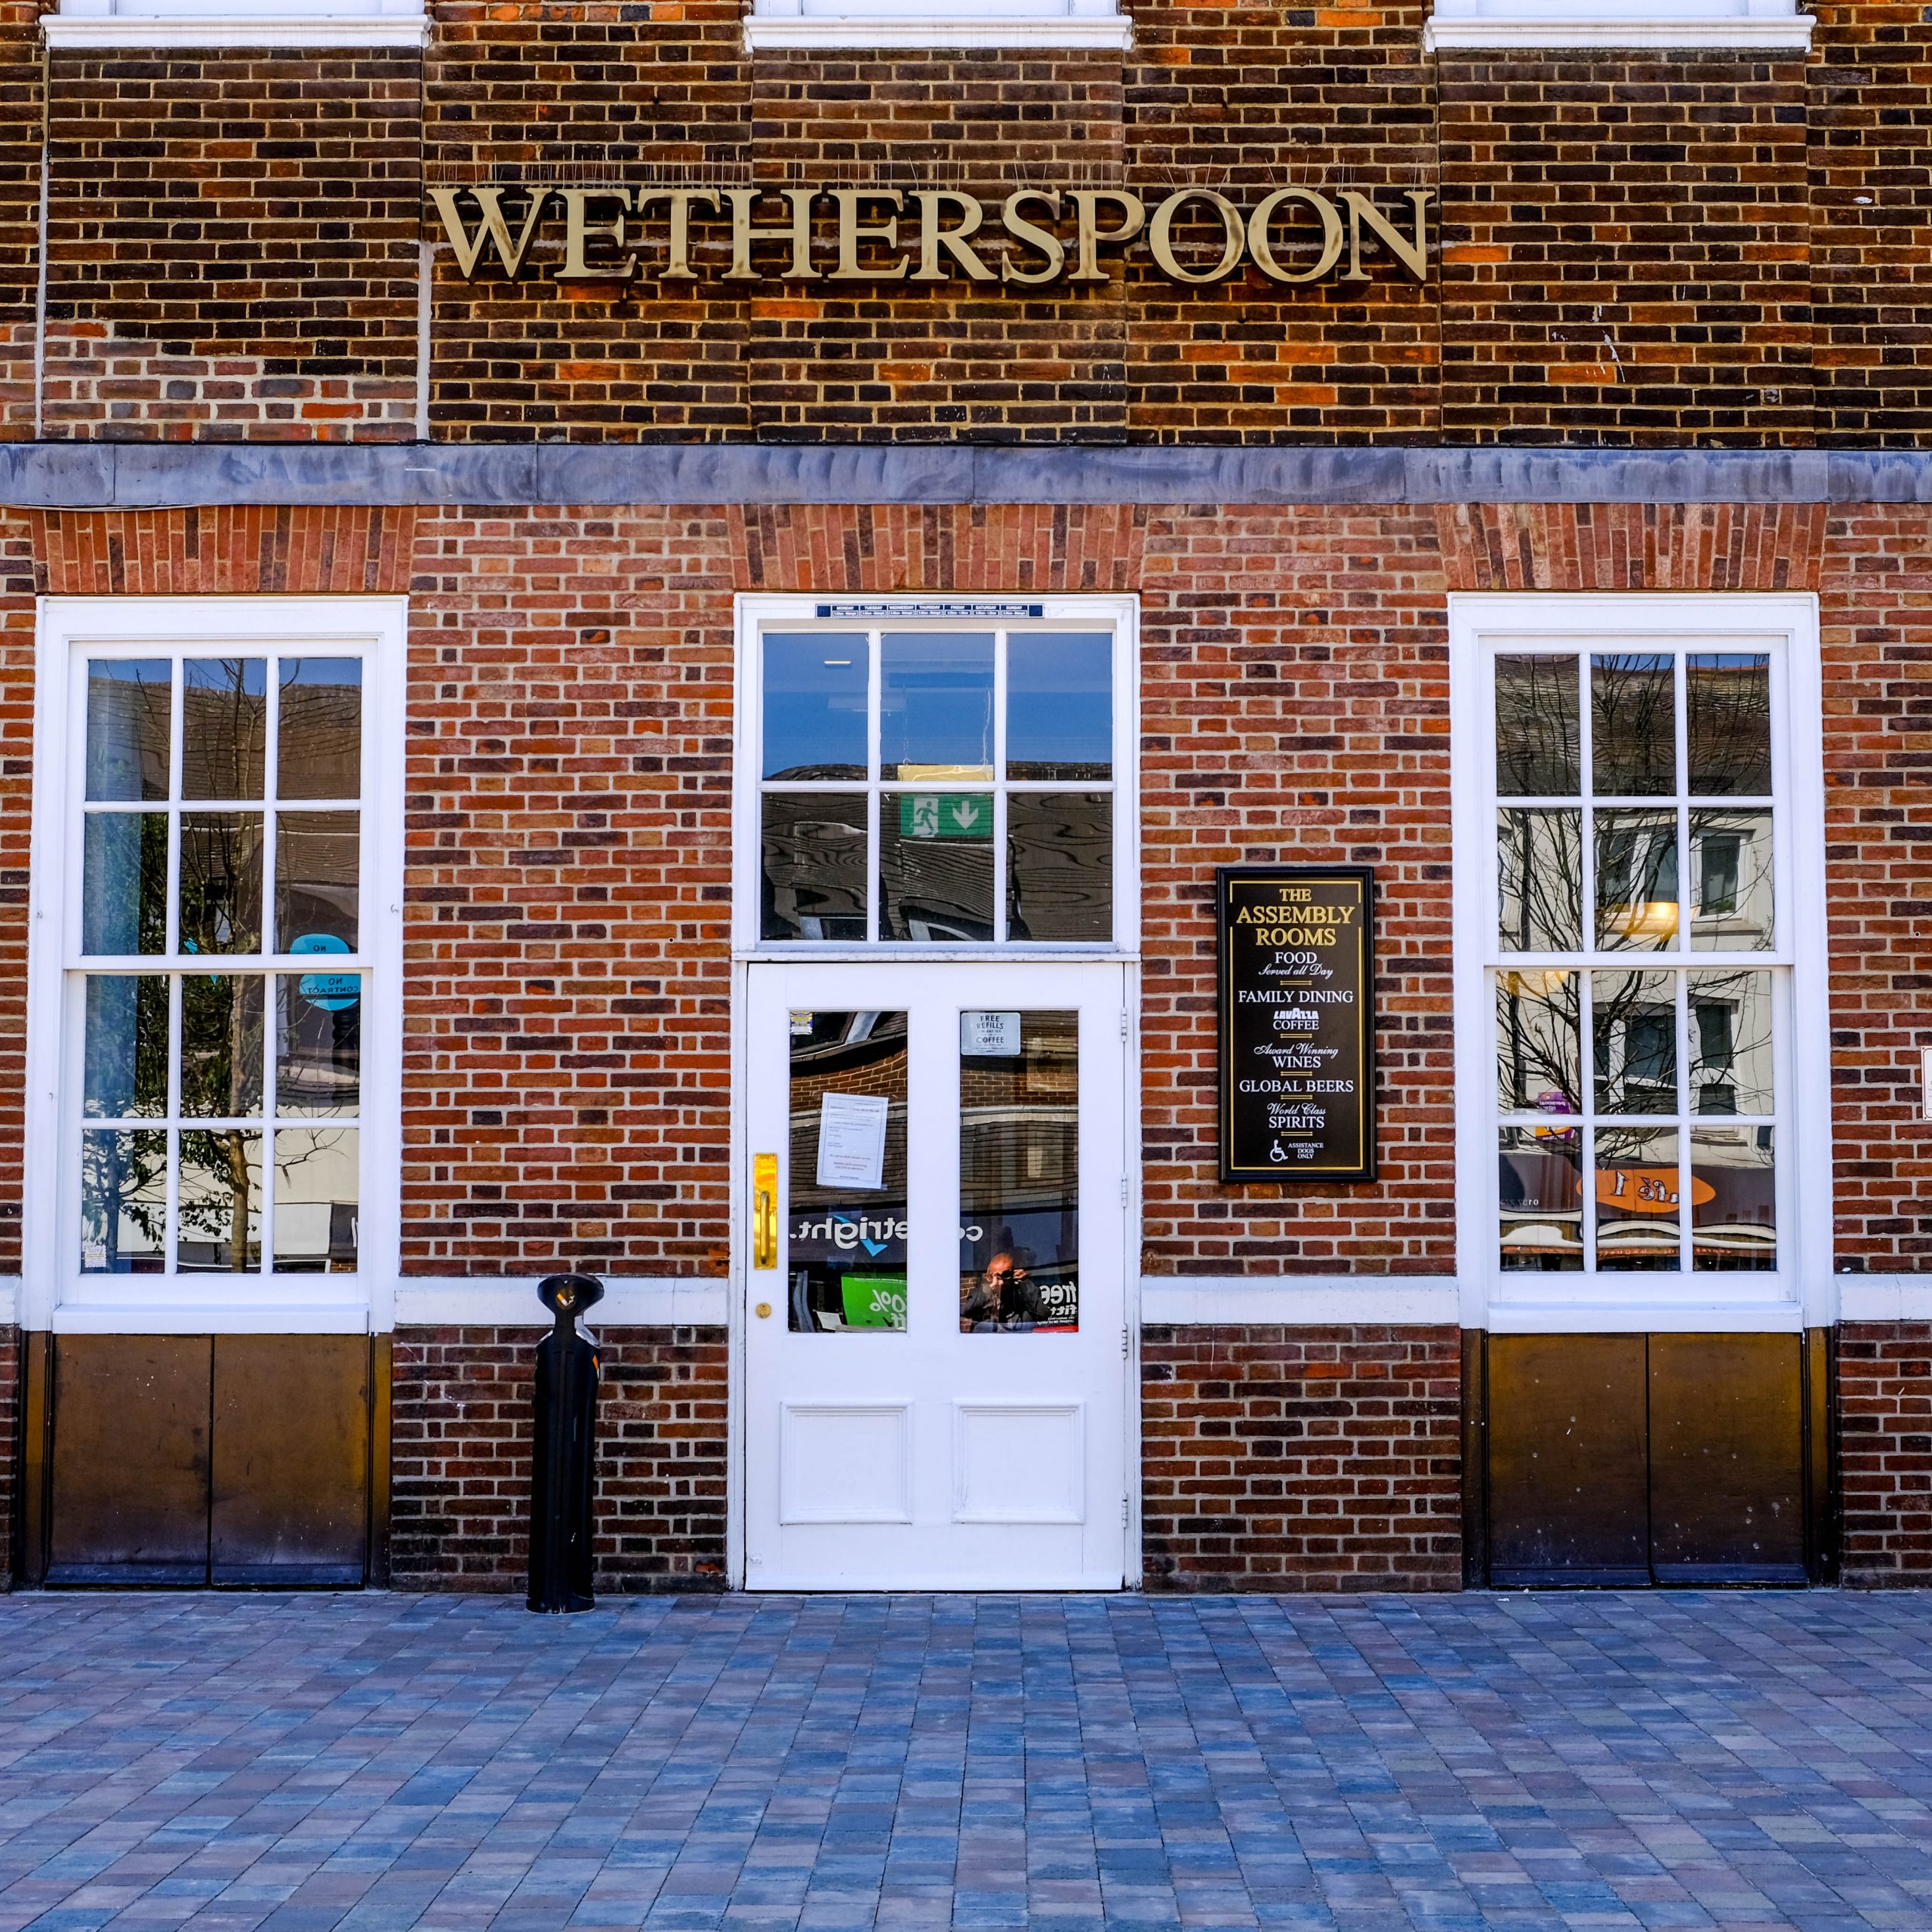 Wetherspoon axes Strongbow and John Smith's from menu in drinks menu shake-up